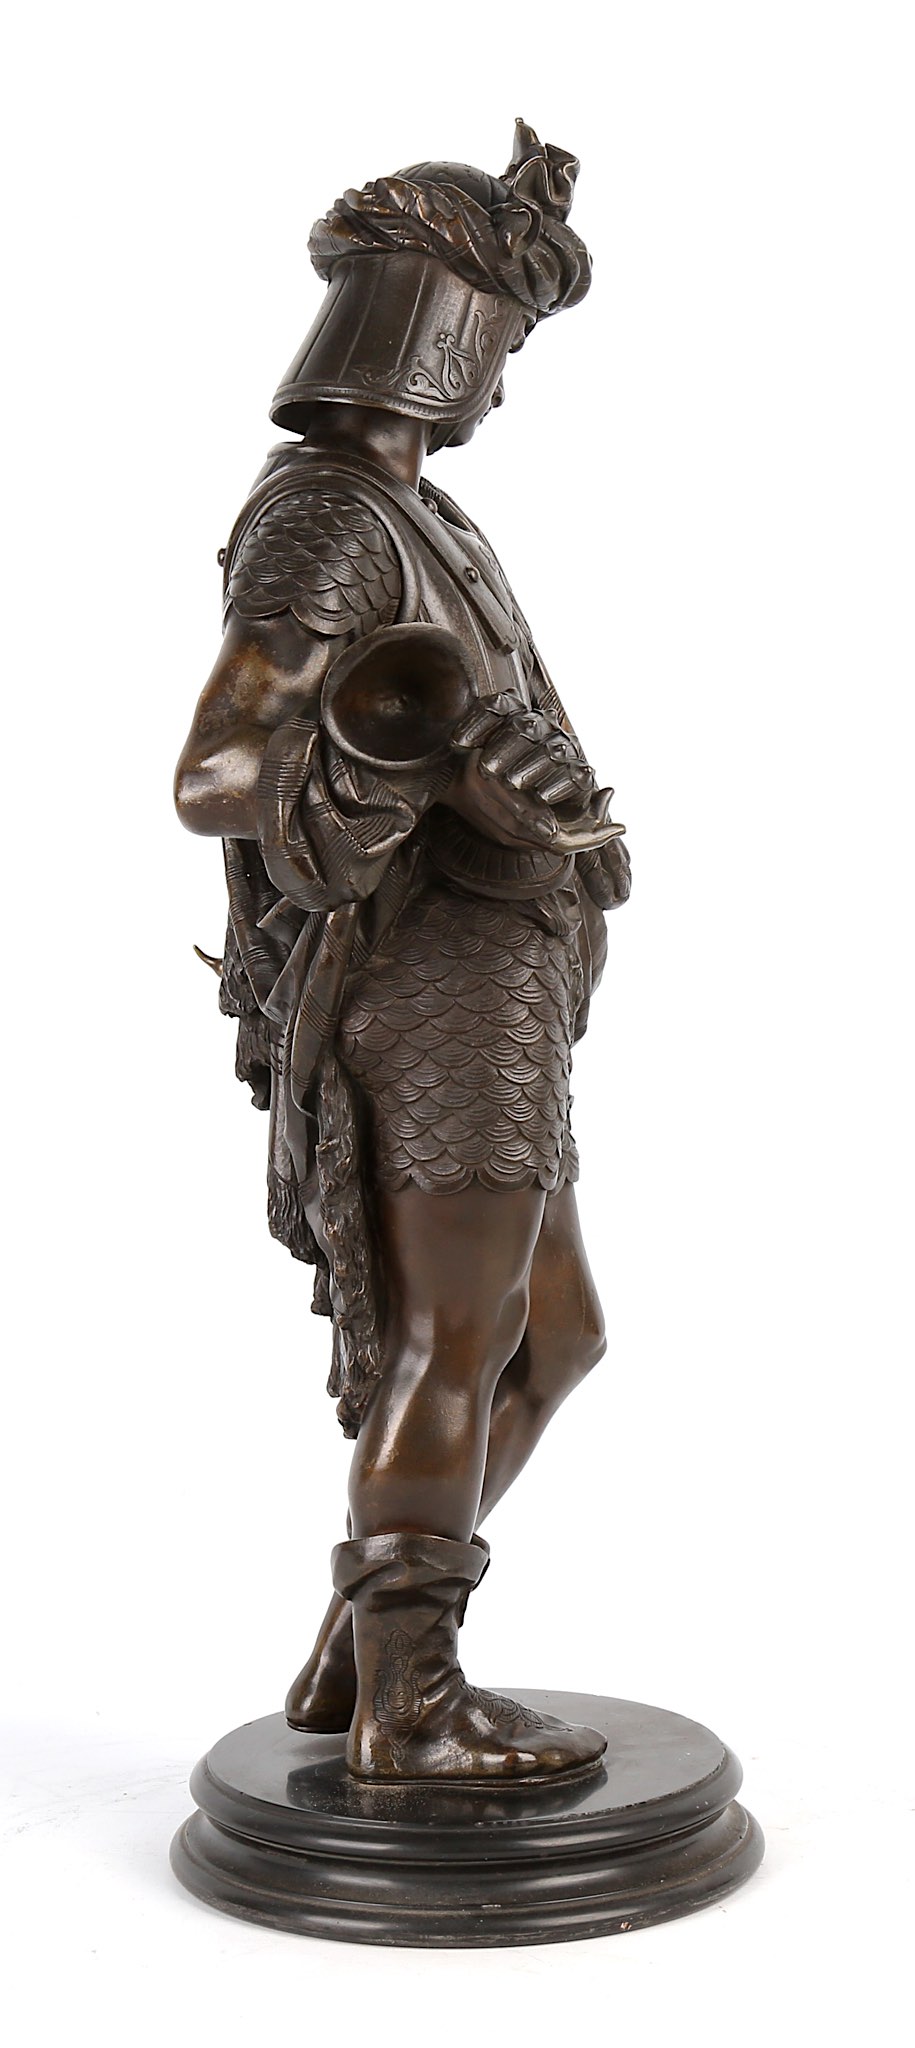 A LATE 19TH CENTURY FRENCH BRONZE FIGURE OF A MEDIEVAL WARRIOR Standing a contra-posto and holding - Image 3 of 13